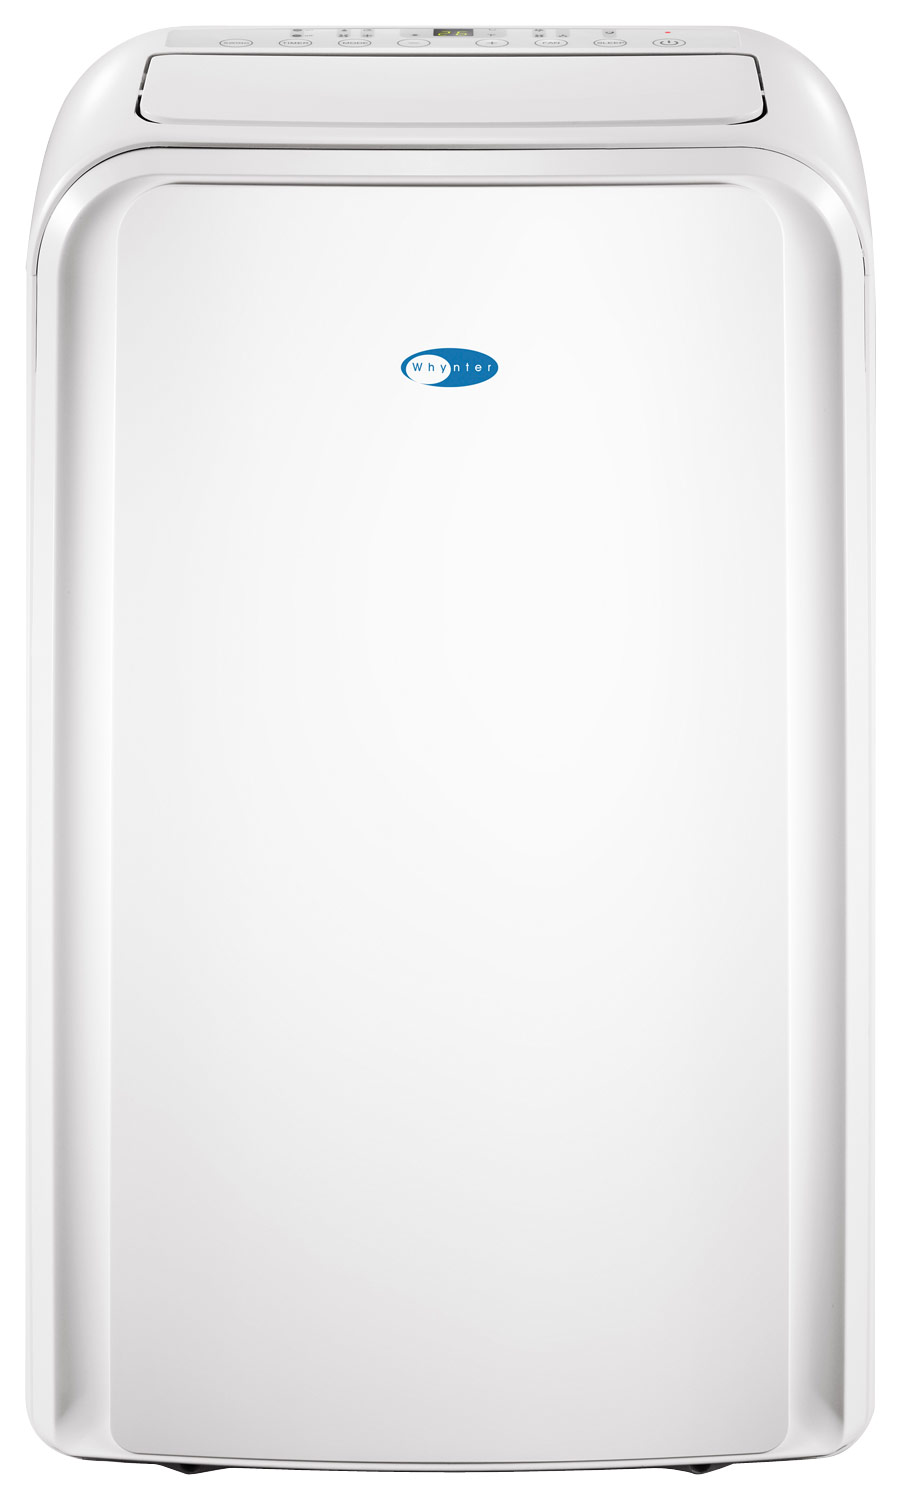 Whynter - 400 Sq. Ft. Portable Air Conditioner - Frost White was $648.99 now $465.99 (28.0% off)